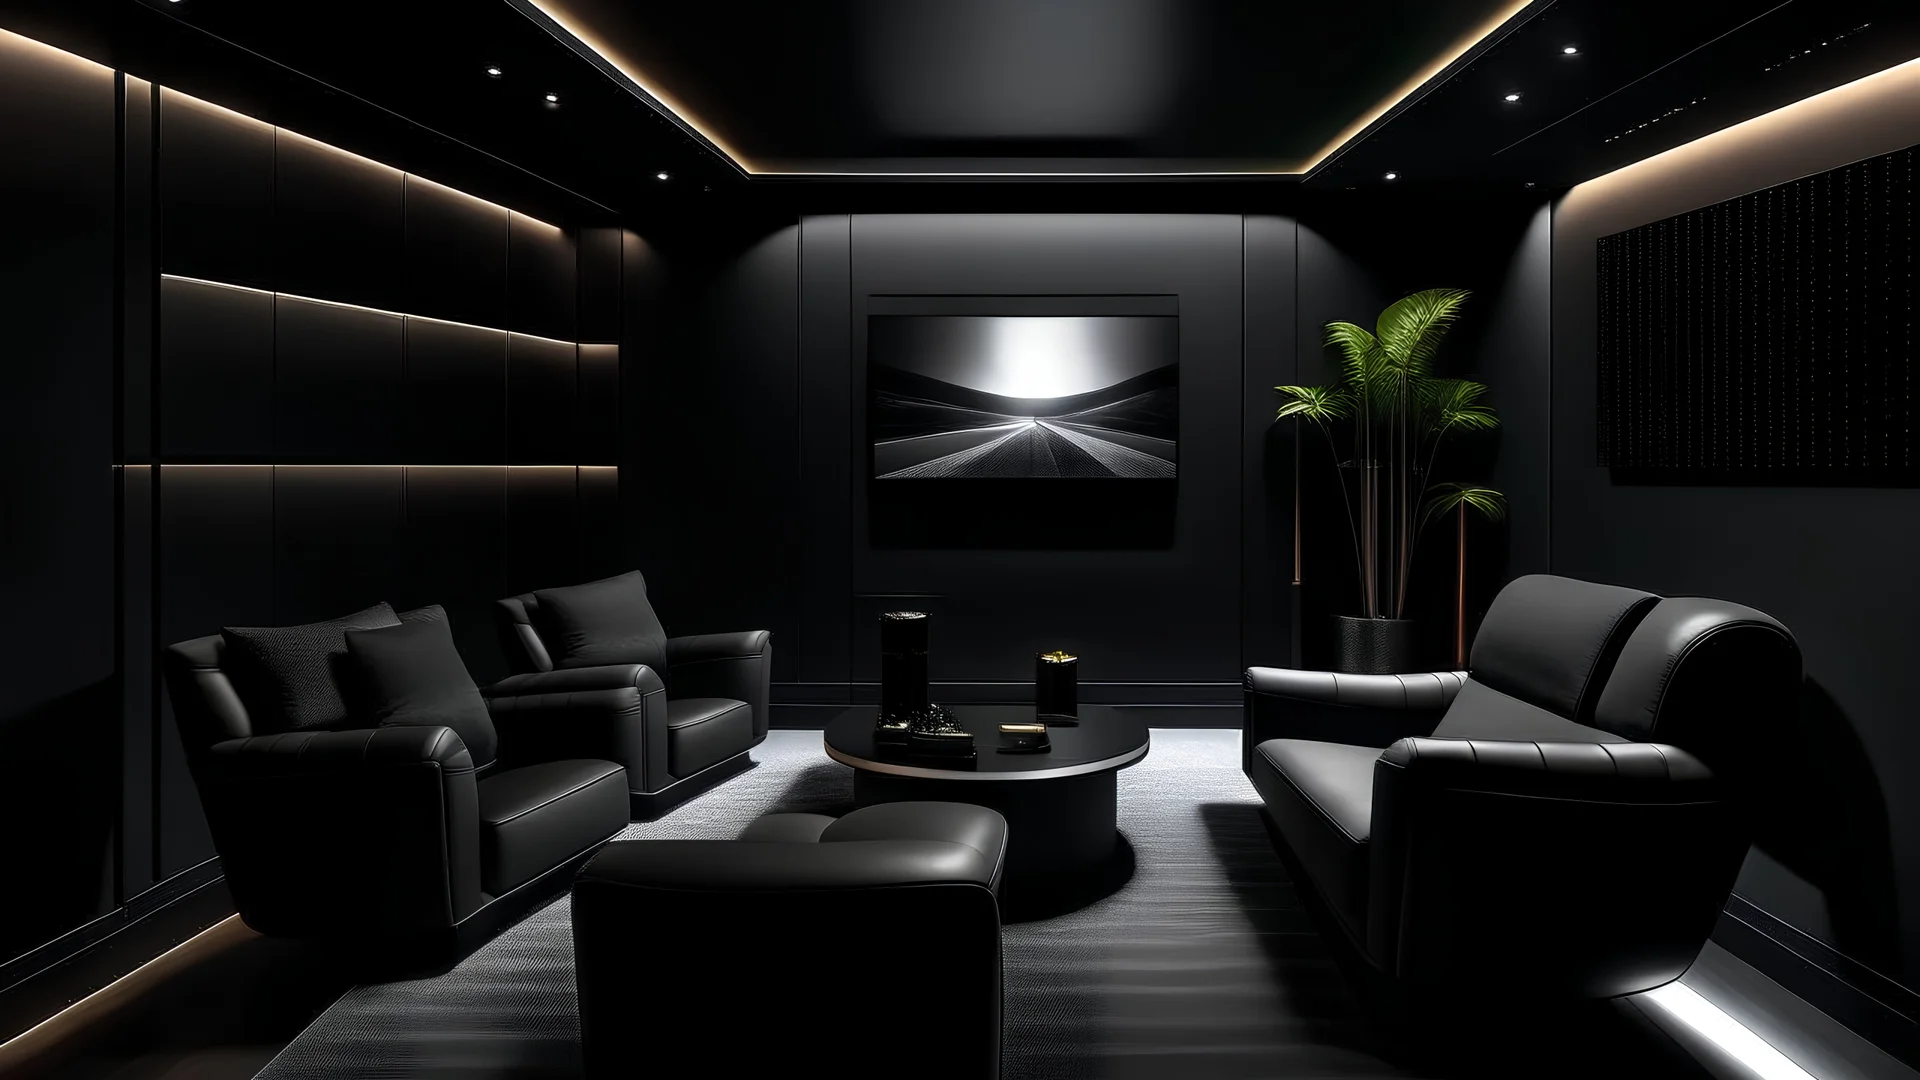 black themed home cinema room, recliners, ambient lighting, warm environment